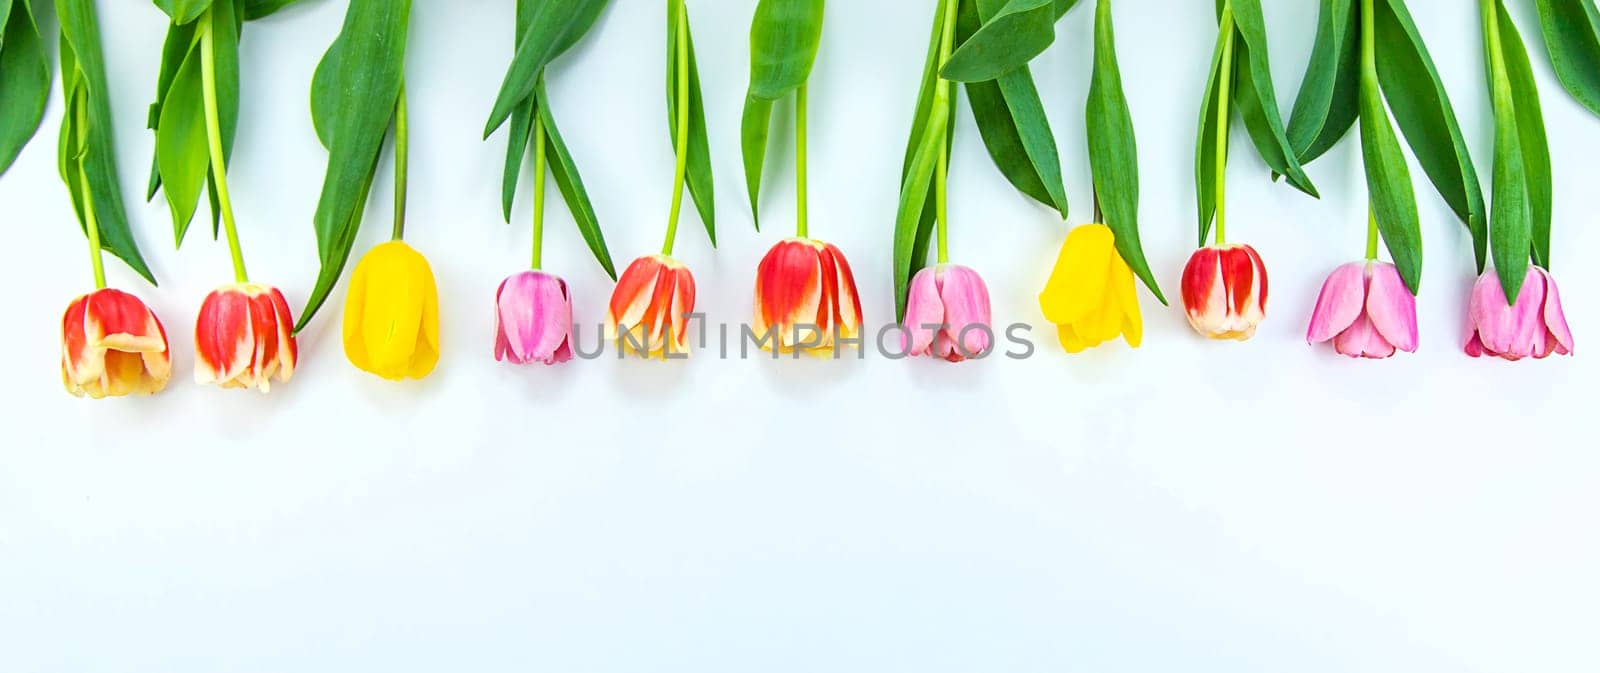 Flowers tulips on a white background. Selective focus. Nature.